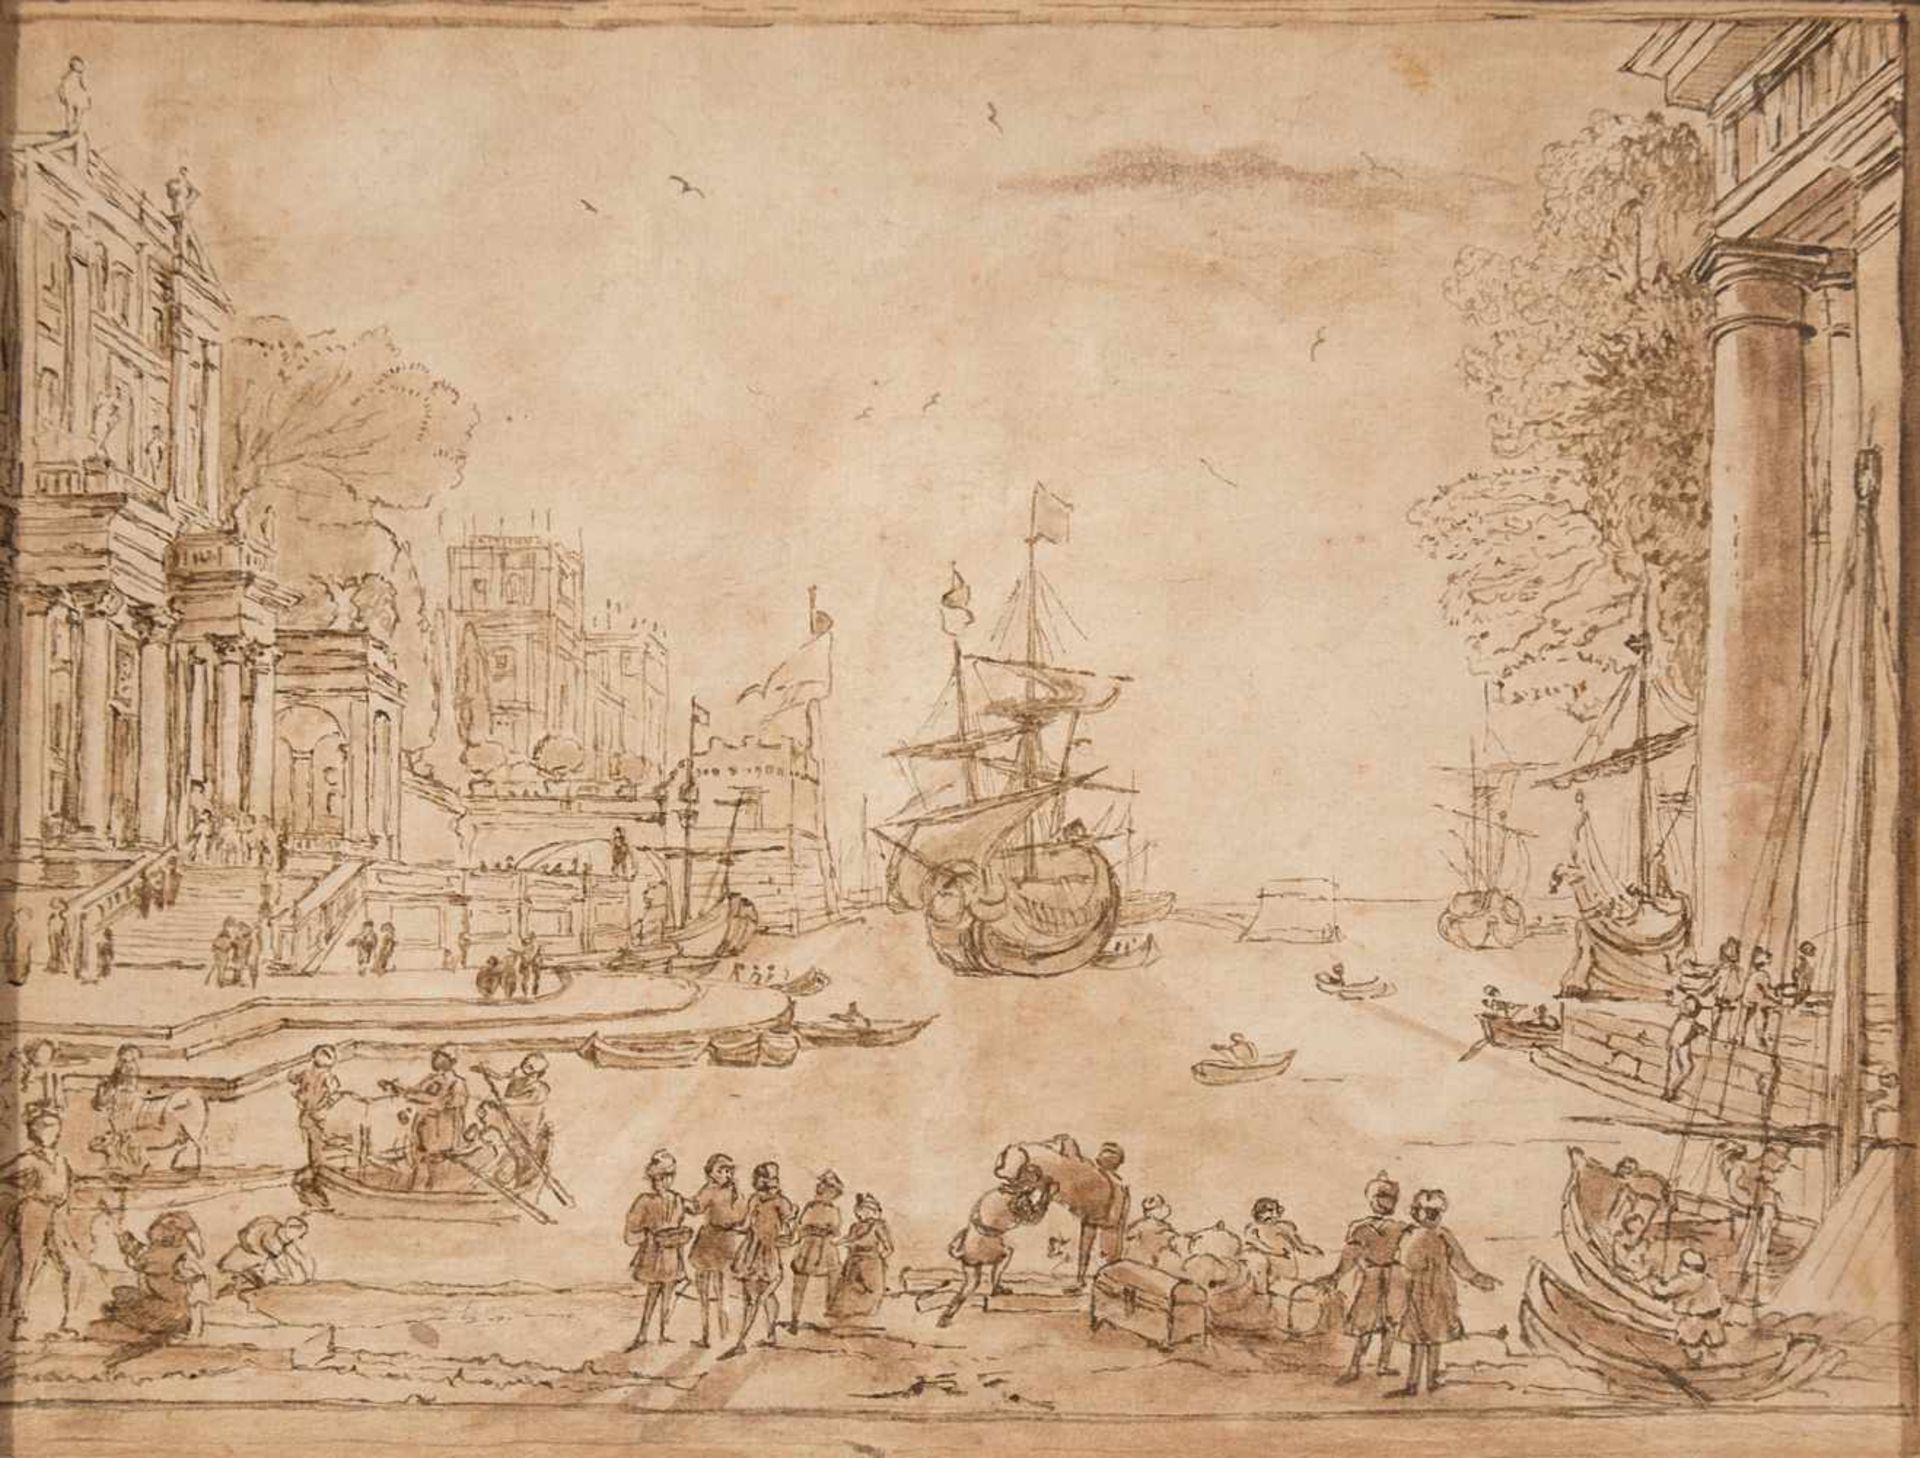 Attributed to Claude Lorrain (Chamagne, France c. 1600 - Rome, 1682)↵“Odysseus returns Chryseis to